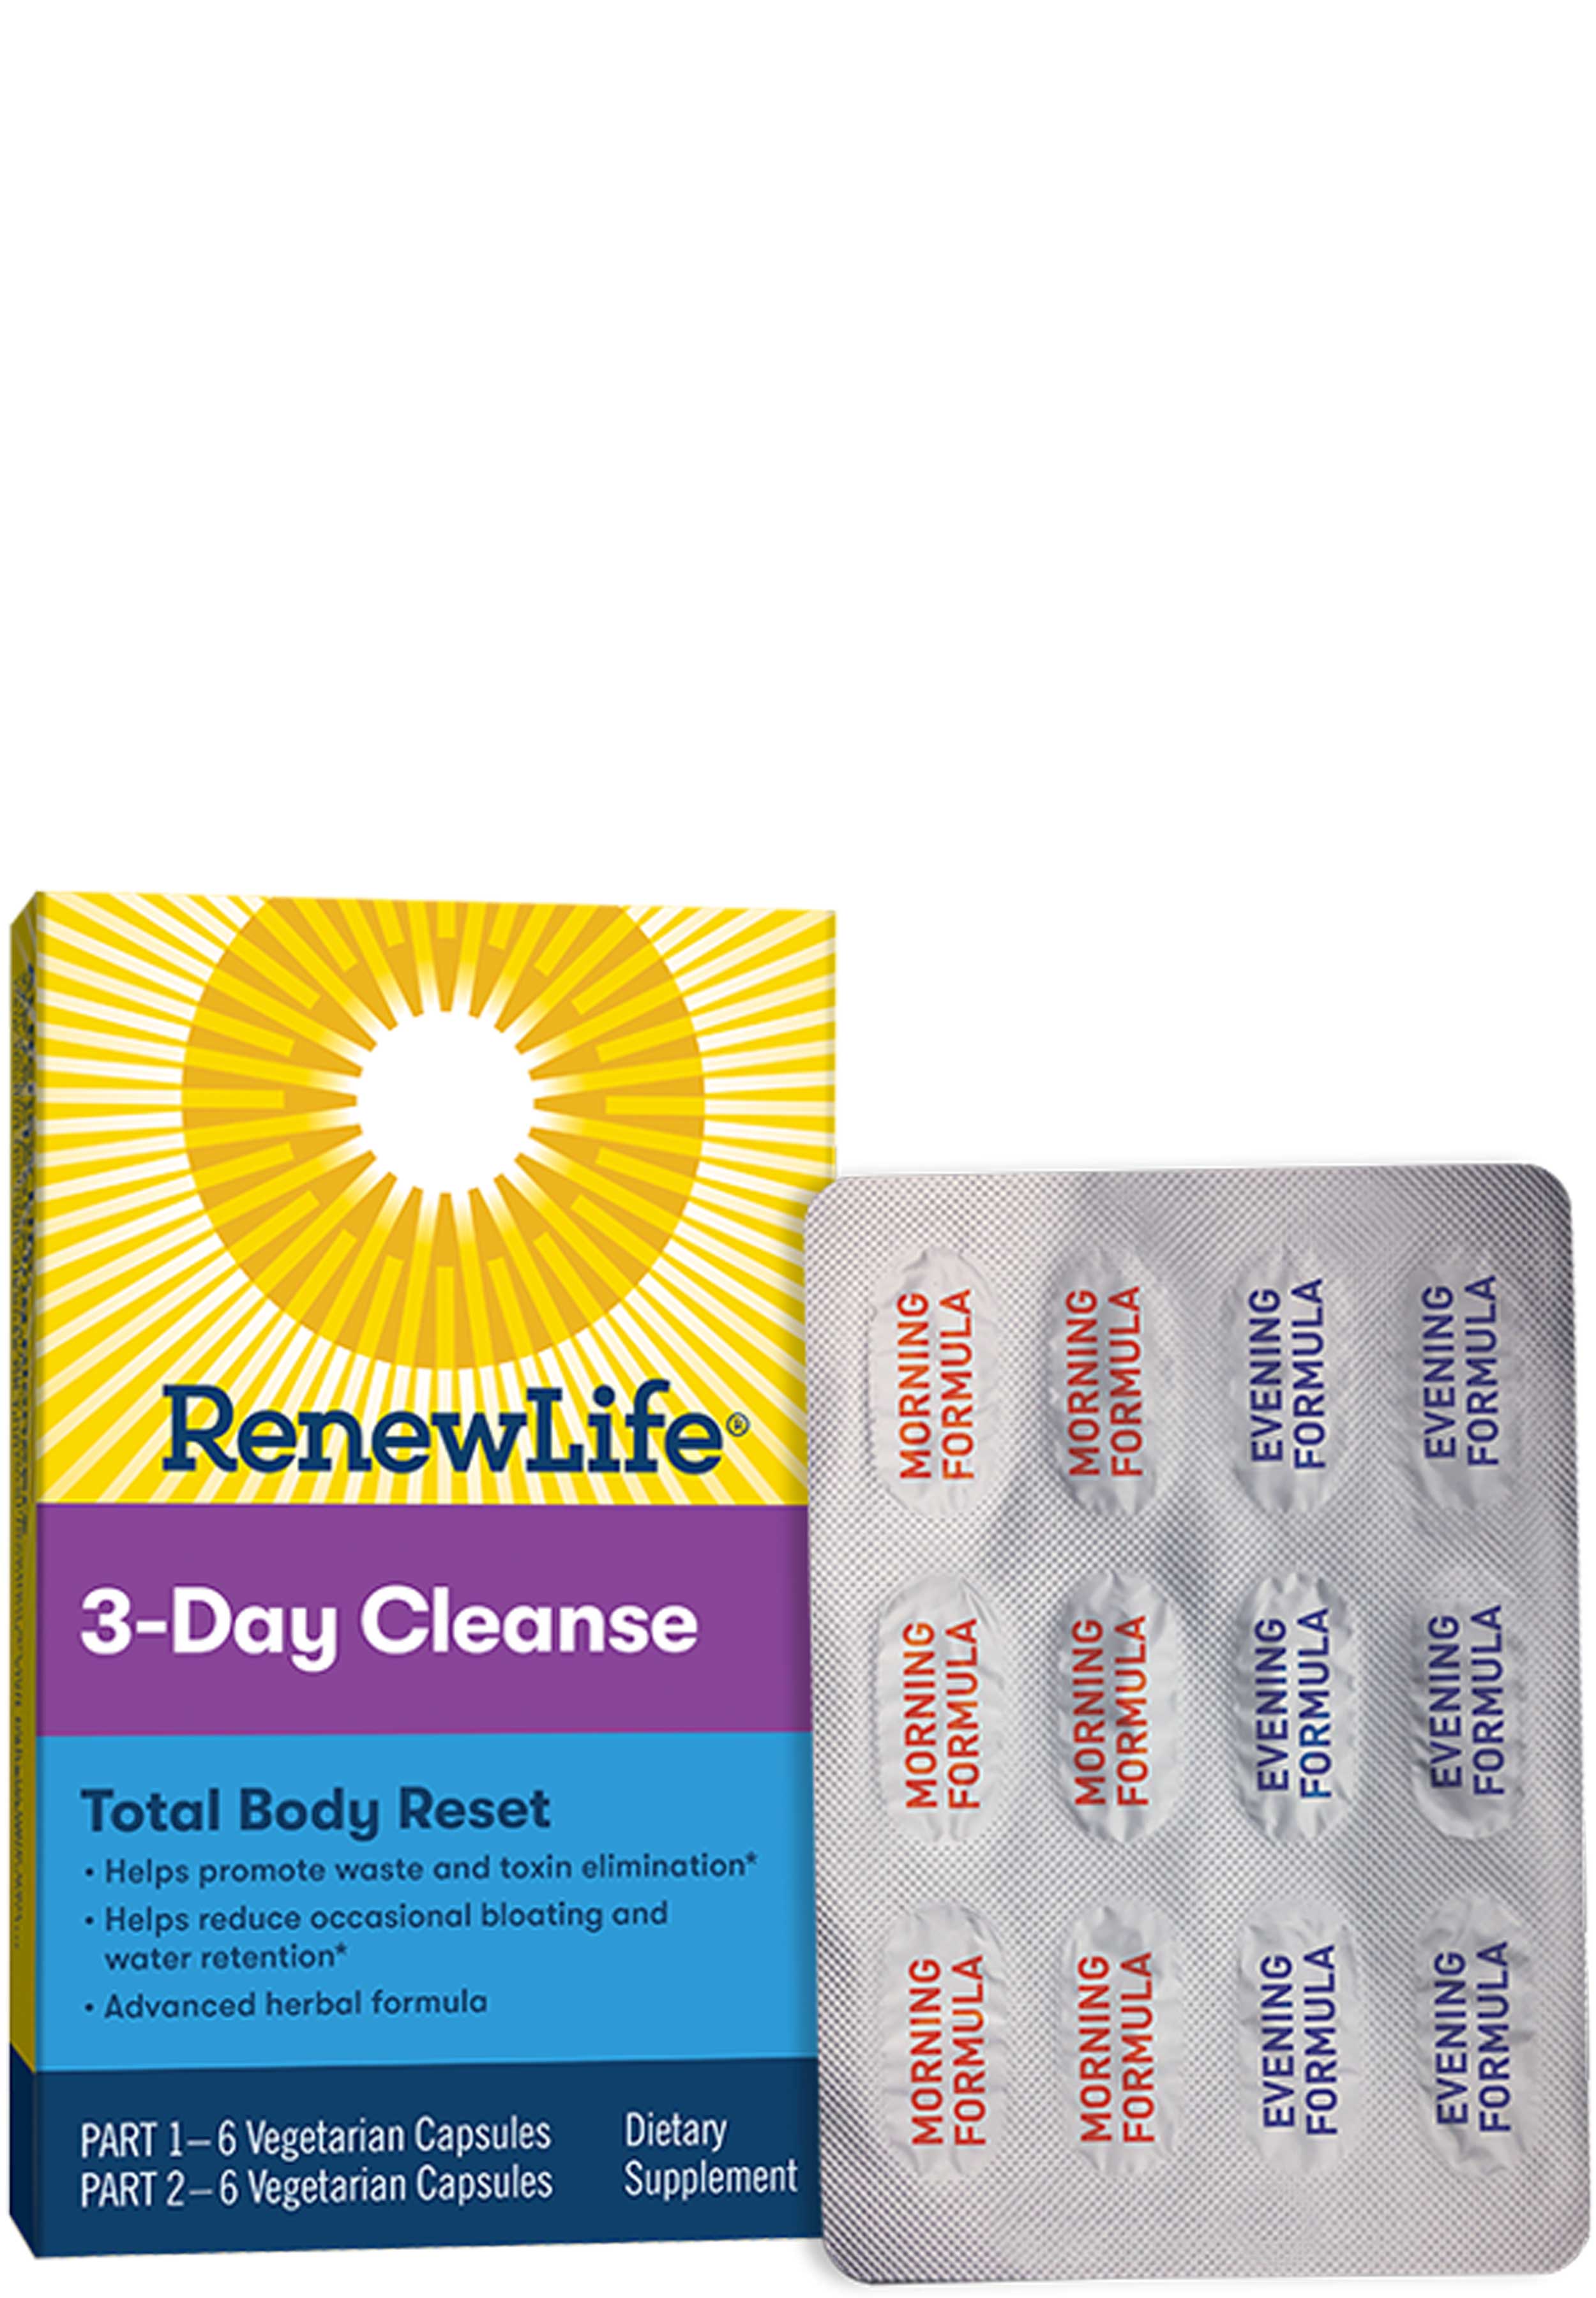 Renew Life 3-Day Cleanse Total-Body Reset Kit